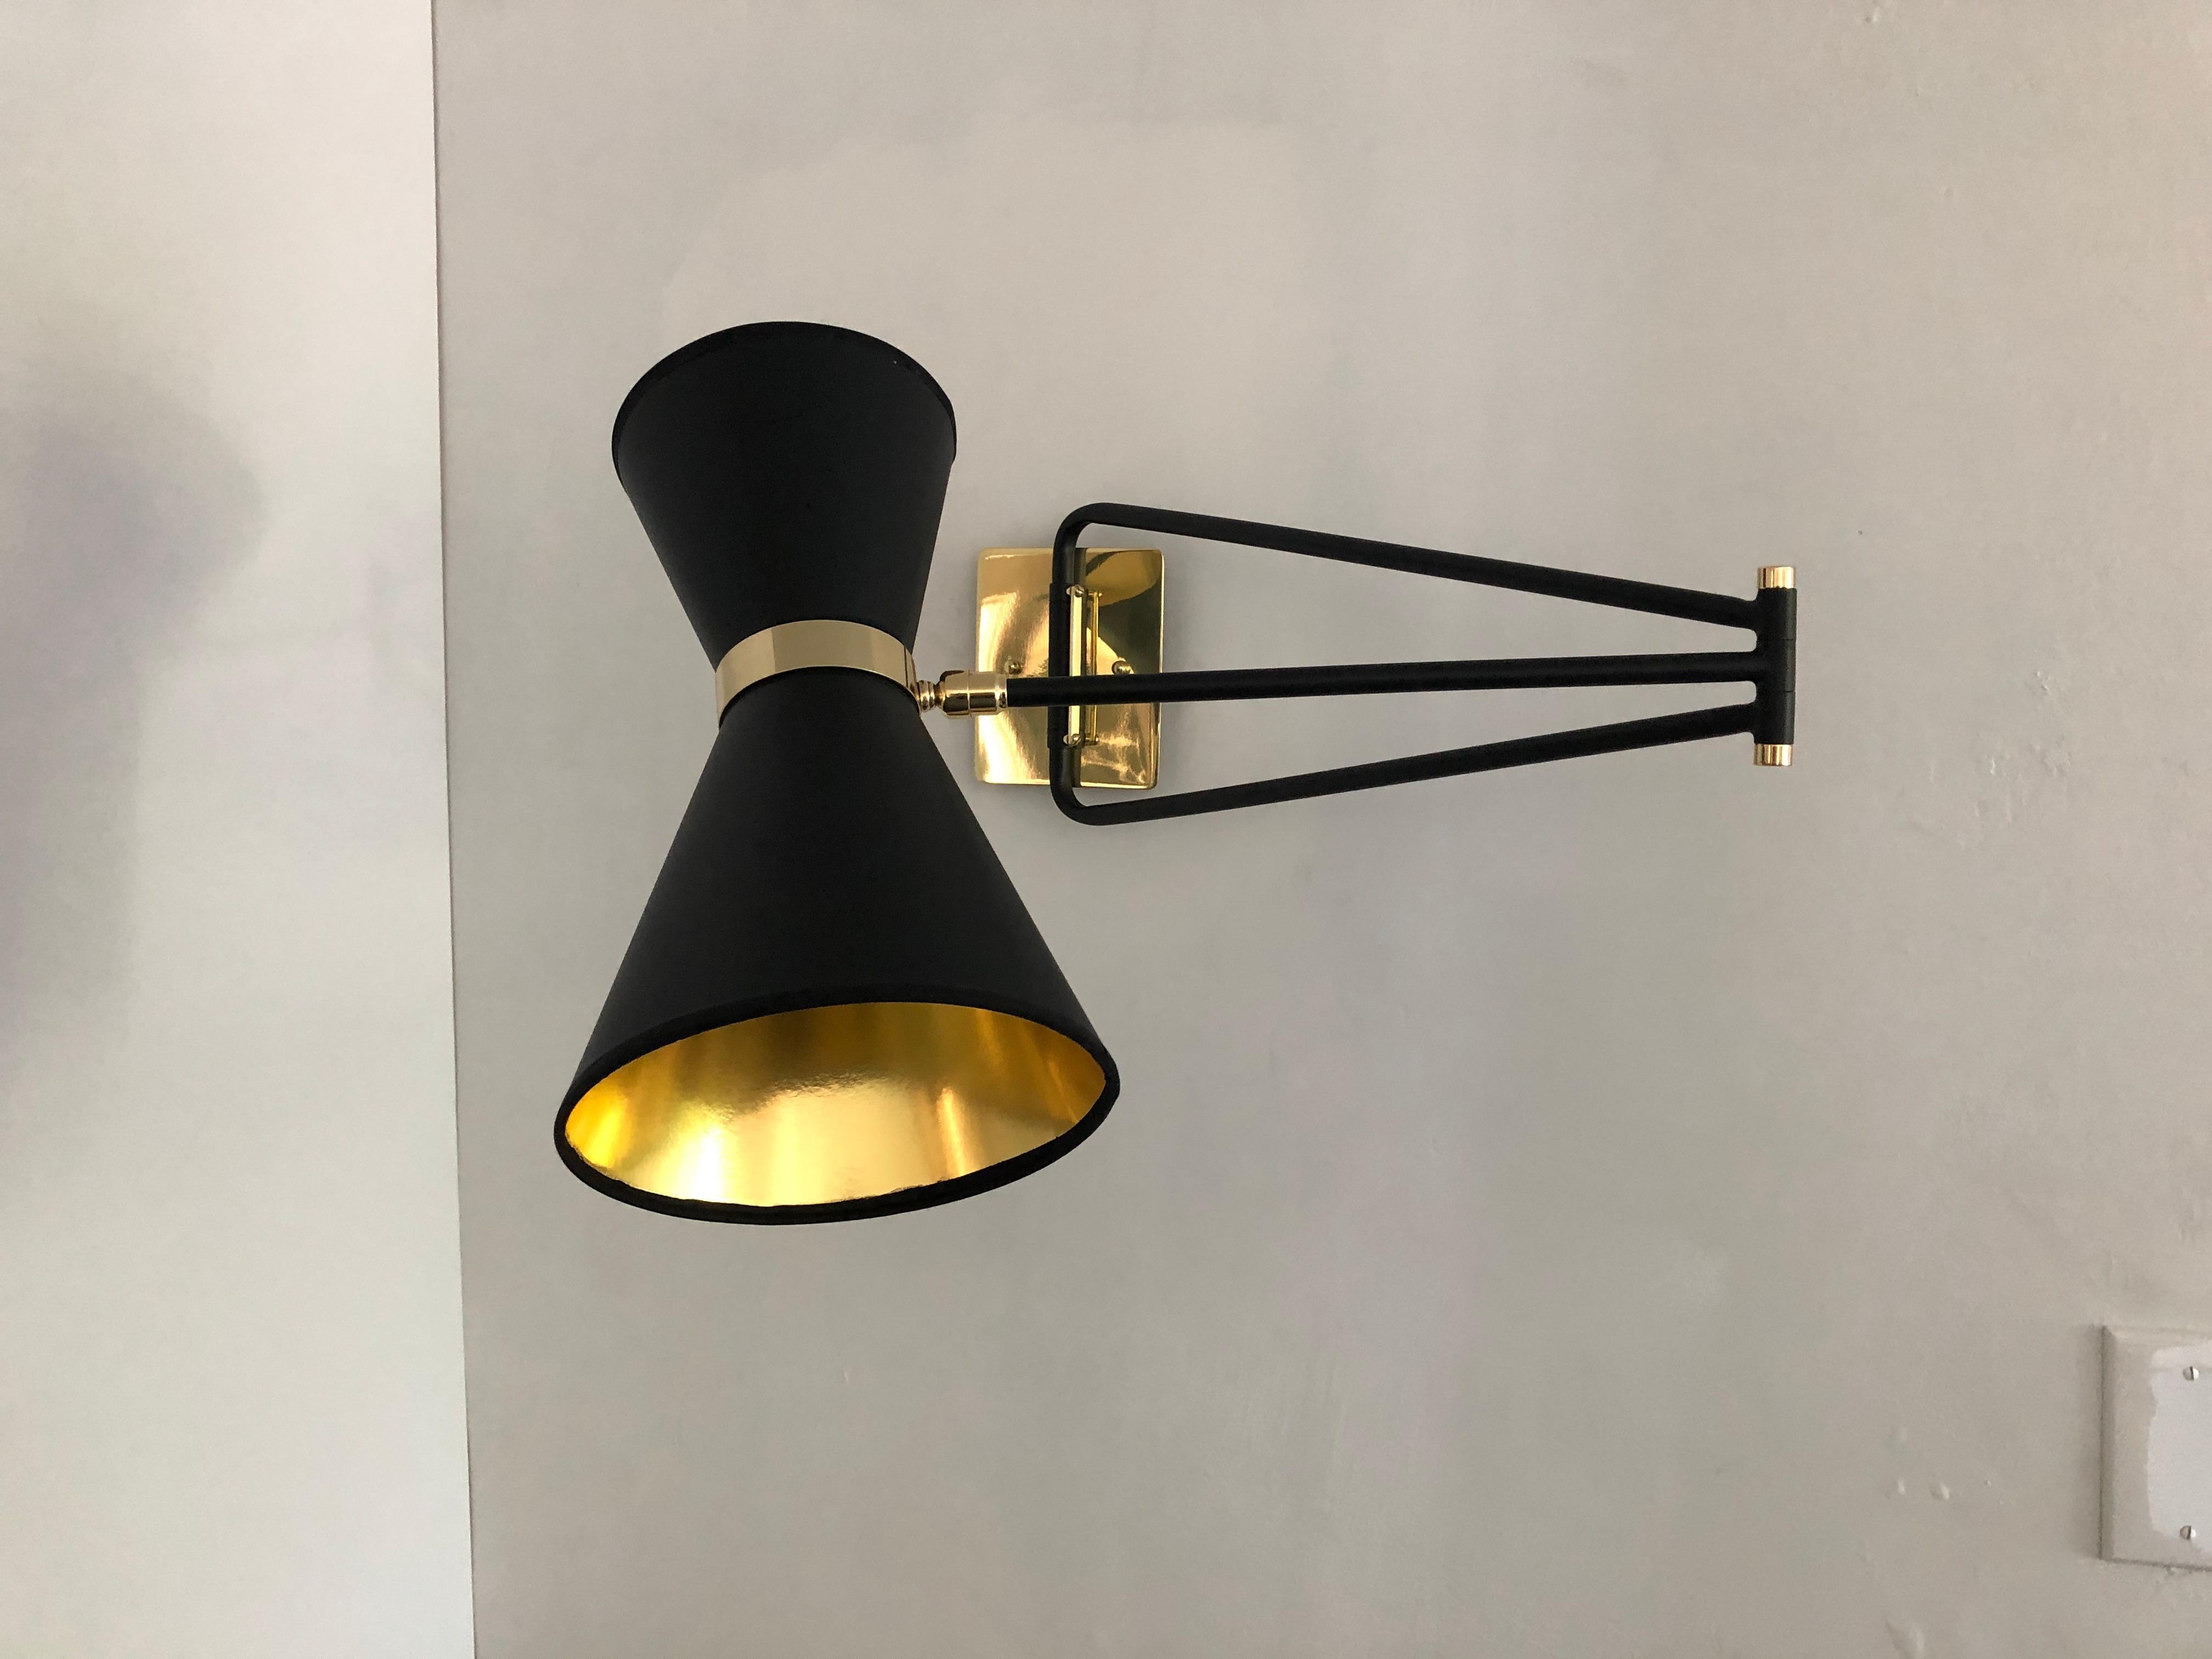 Bolivar Sconce, Black Paper Shade, by Bourgeois Boheme Atelier In New Condition For Sale In Los Angeles, CA